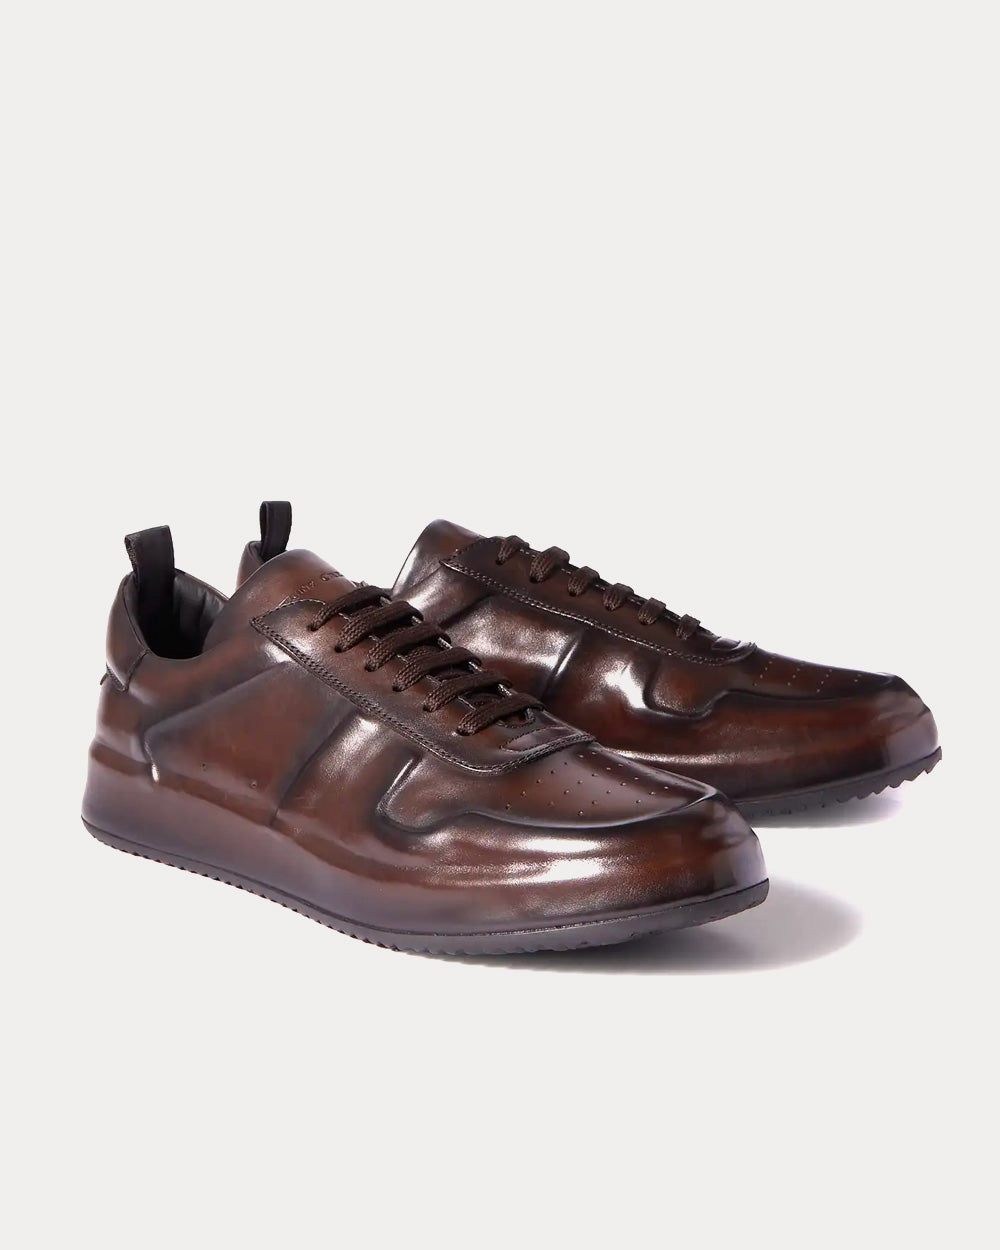 Officine Creative - Ace Lux Leather Dark Brown Low Top Sneakers